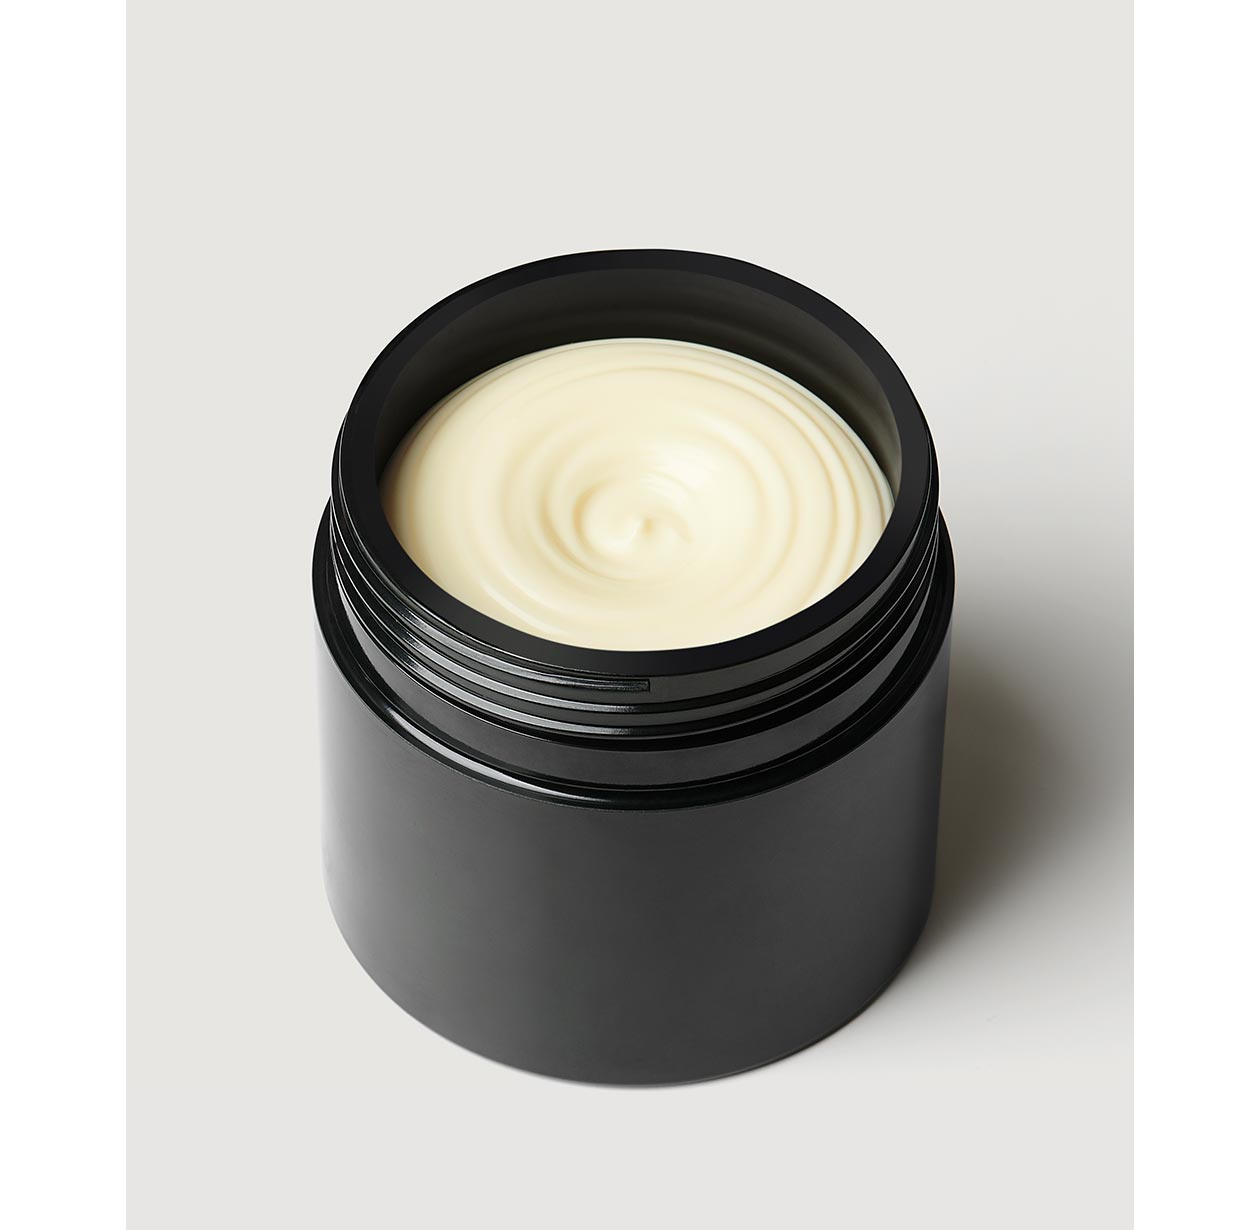 <p <span style="color:#000000;"><span style="font-size:12px;">FREDERIC MALLE </span></span></p>Body Butter 